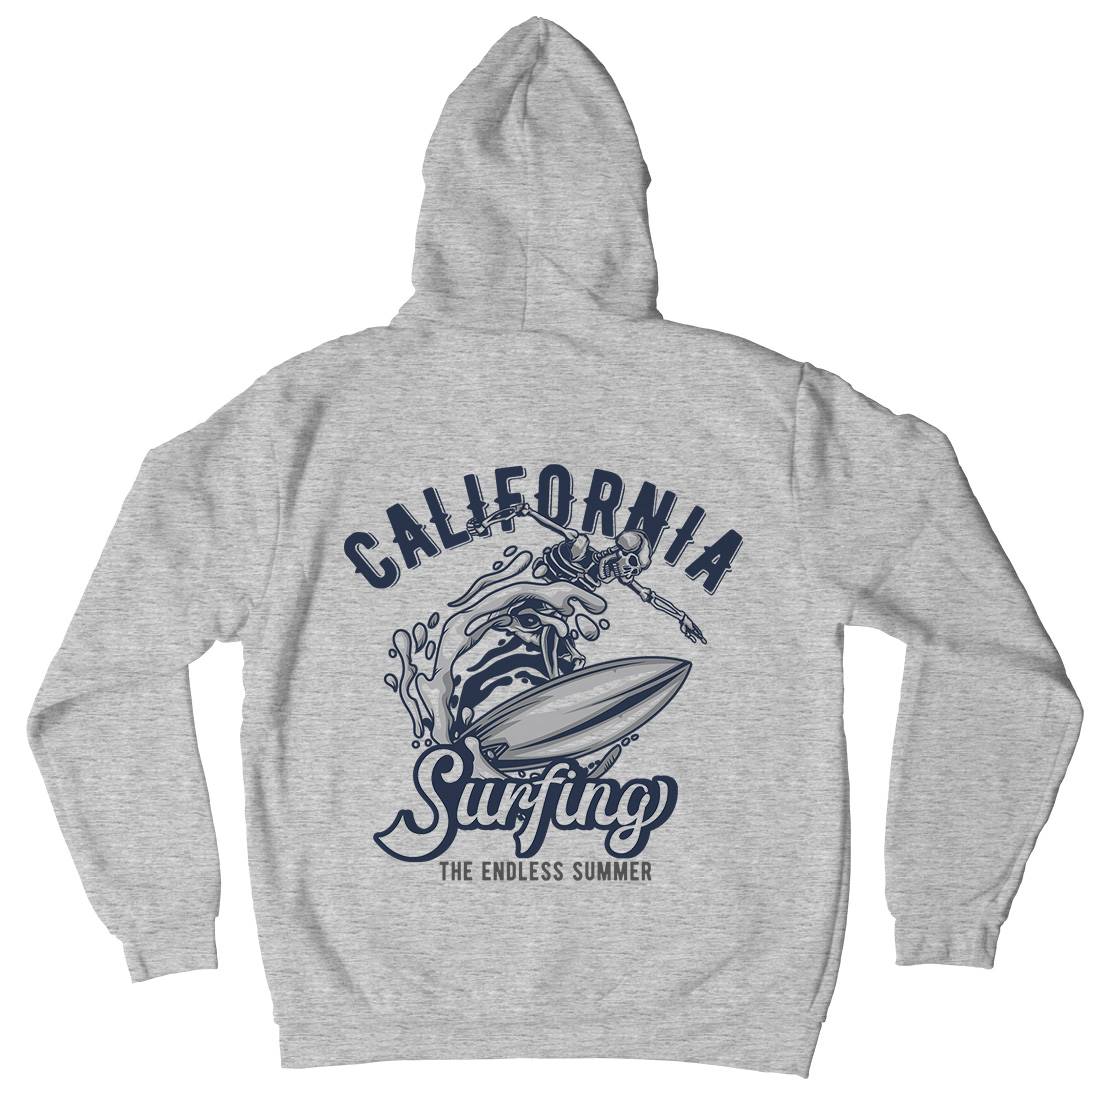 California Surfing Mens Hoodie With Pocket Surf B171